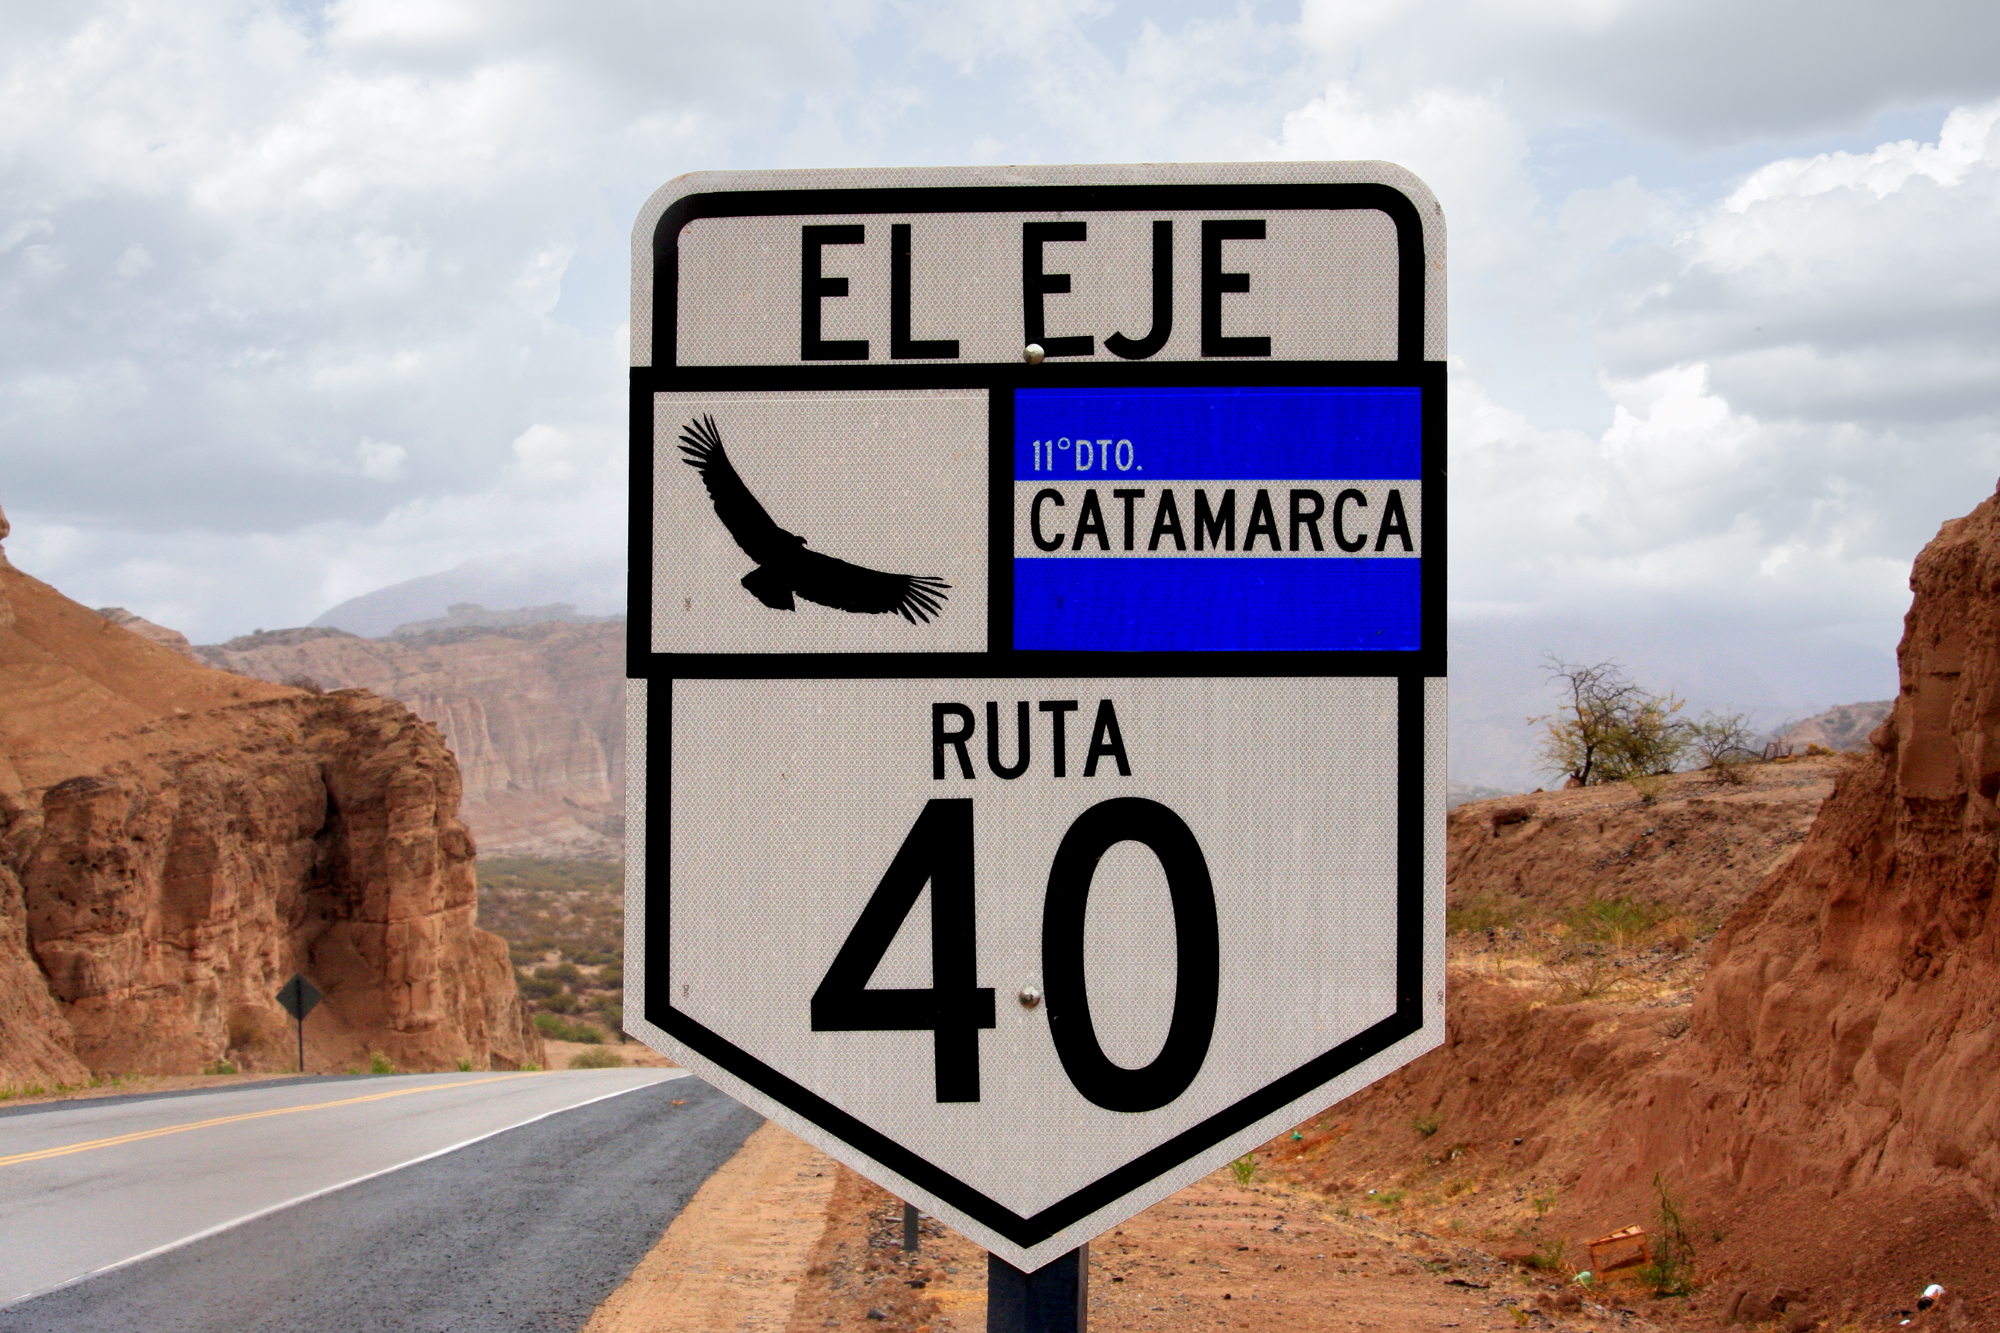 Lakeland on National Route 40 in Argentina